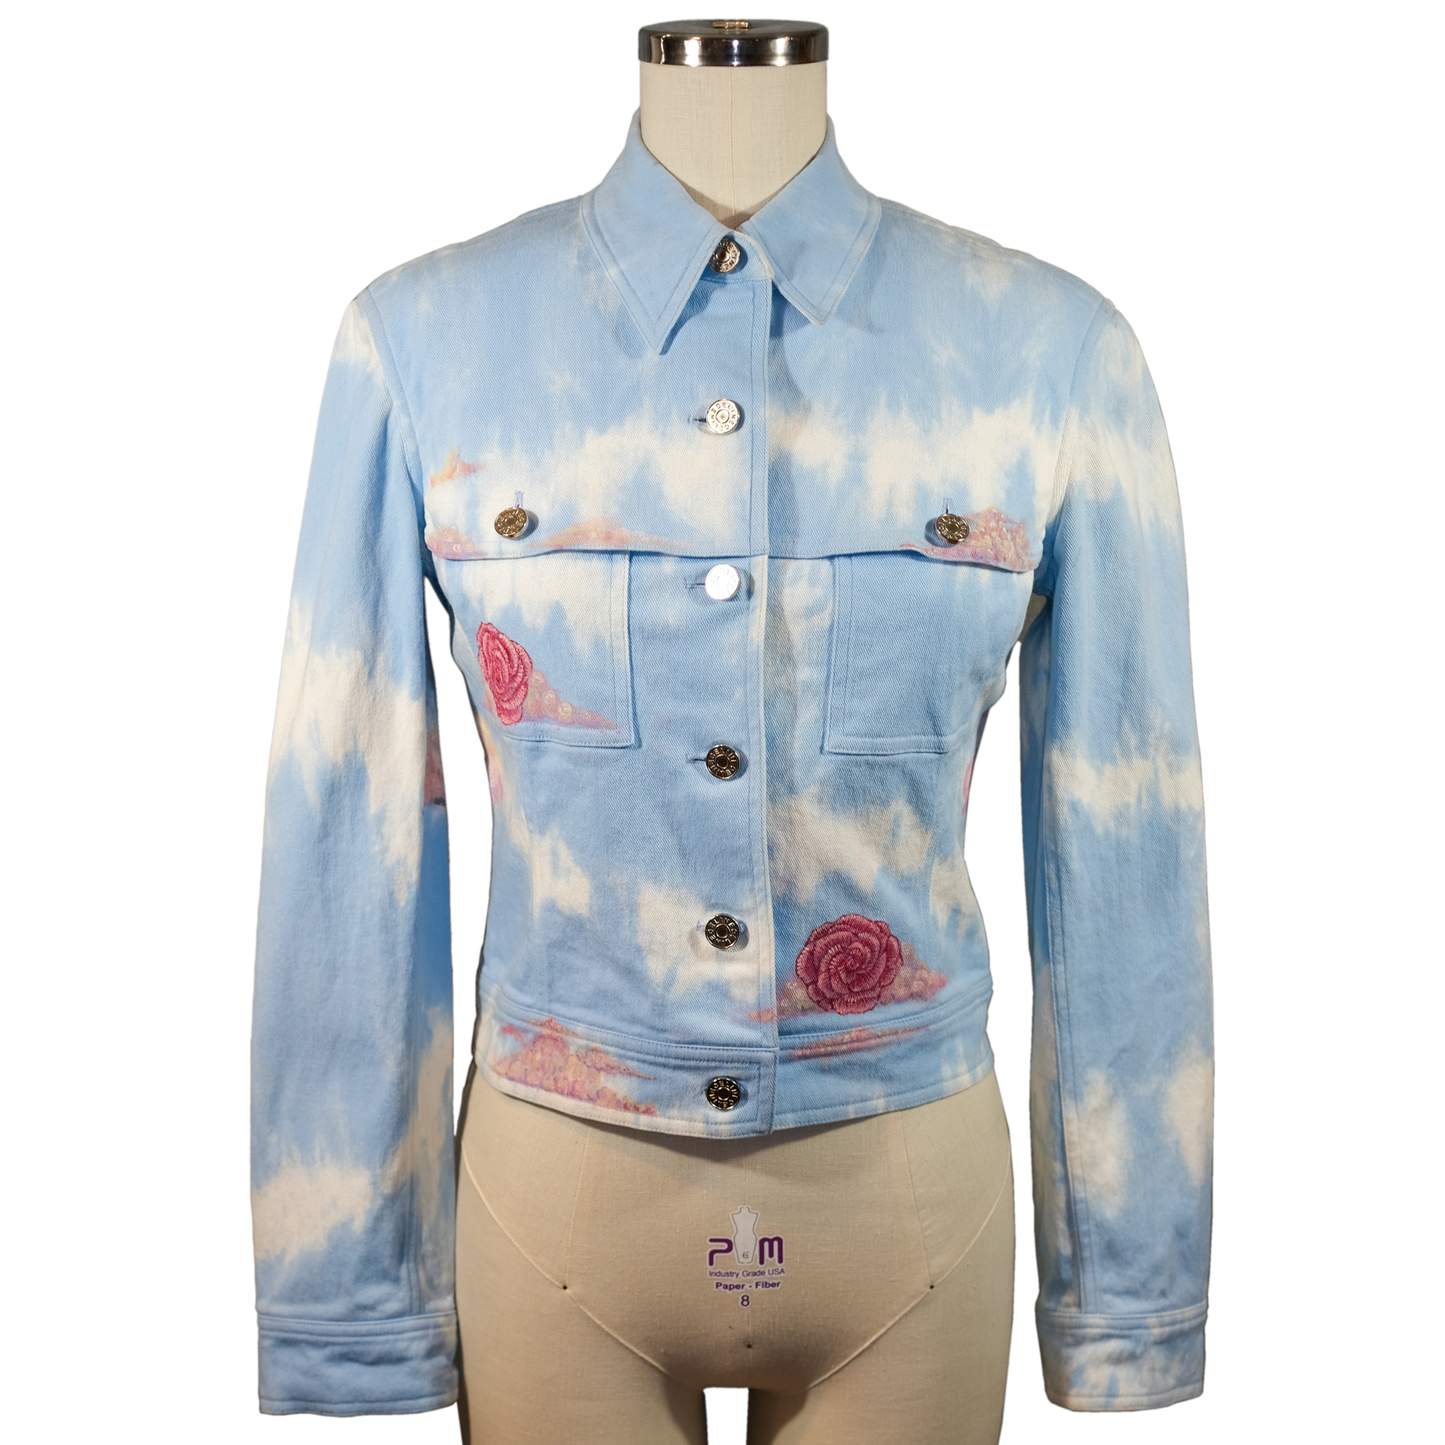 “Rose Colored Skies” - Up-cycled Tie Dye Denim Jacket - Size 38 (MD) Hand Painted by Skye De La Rosa